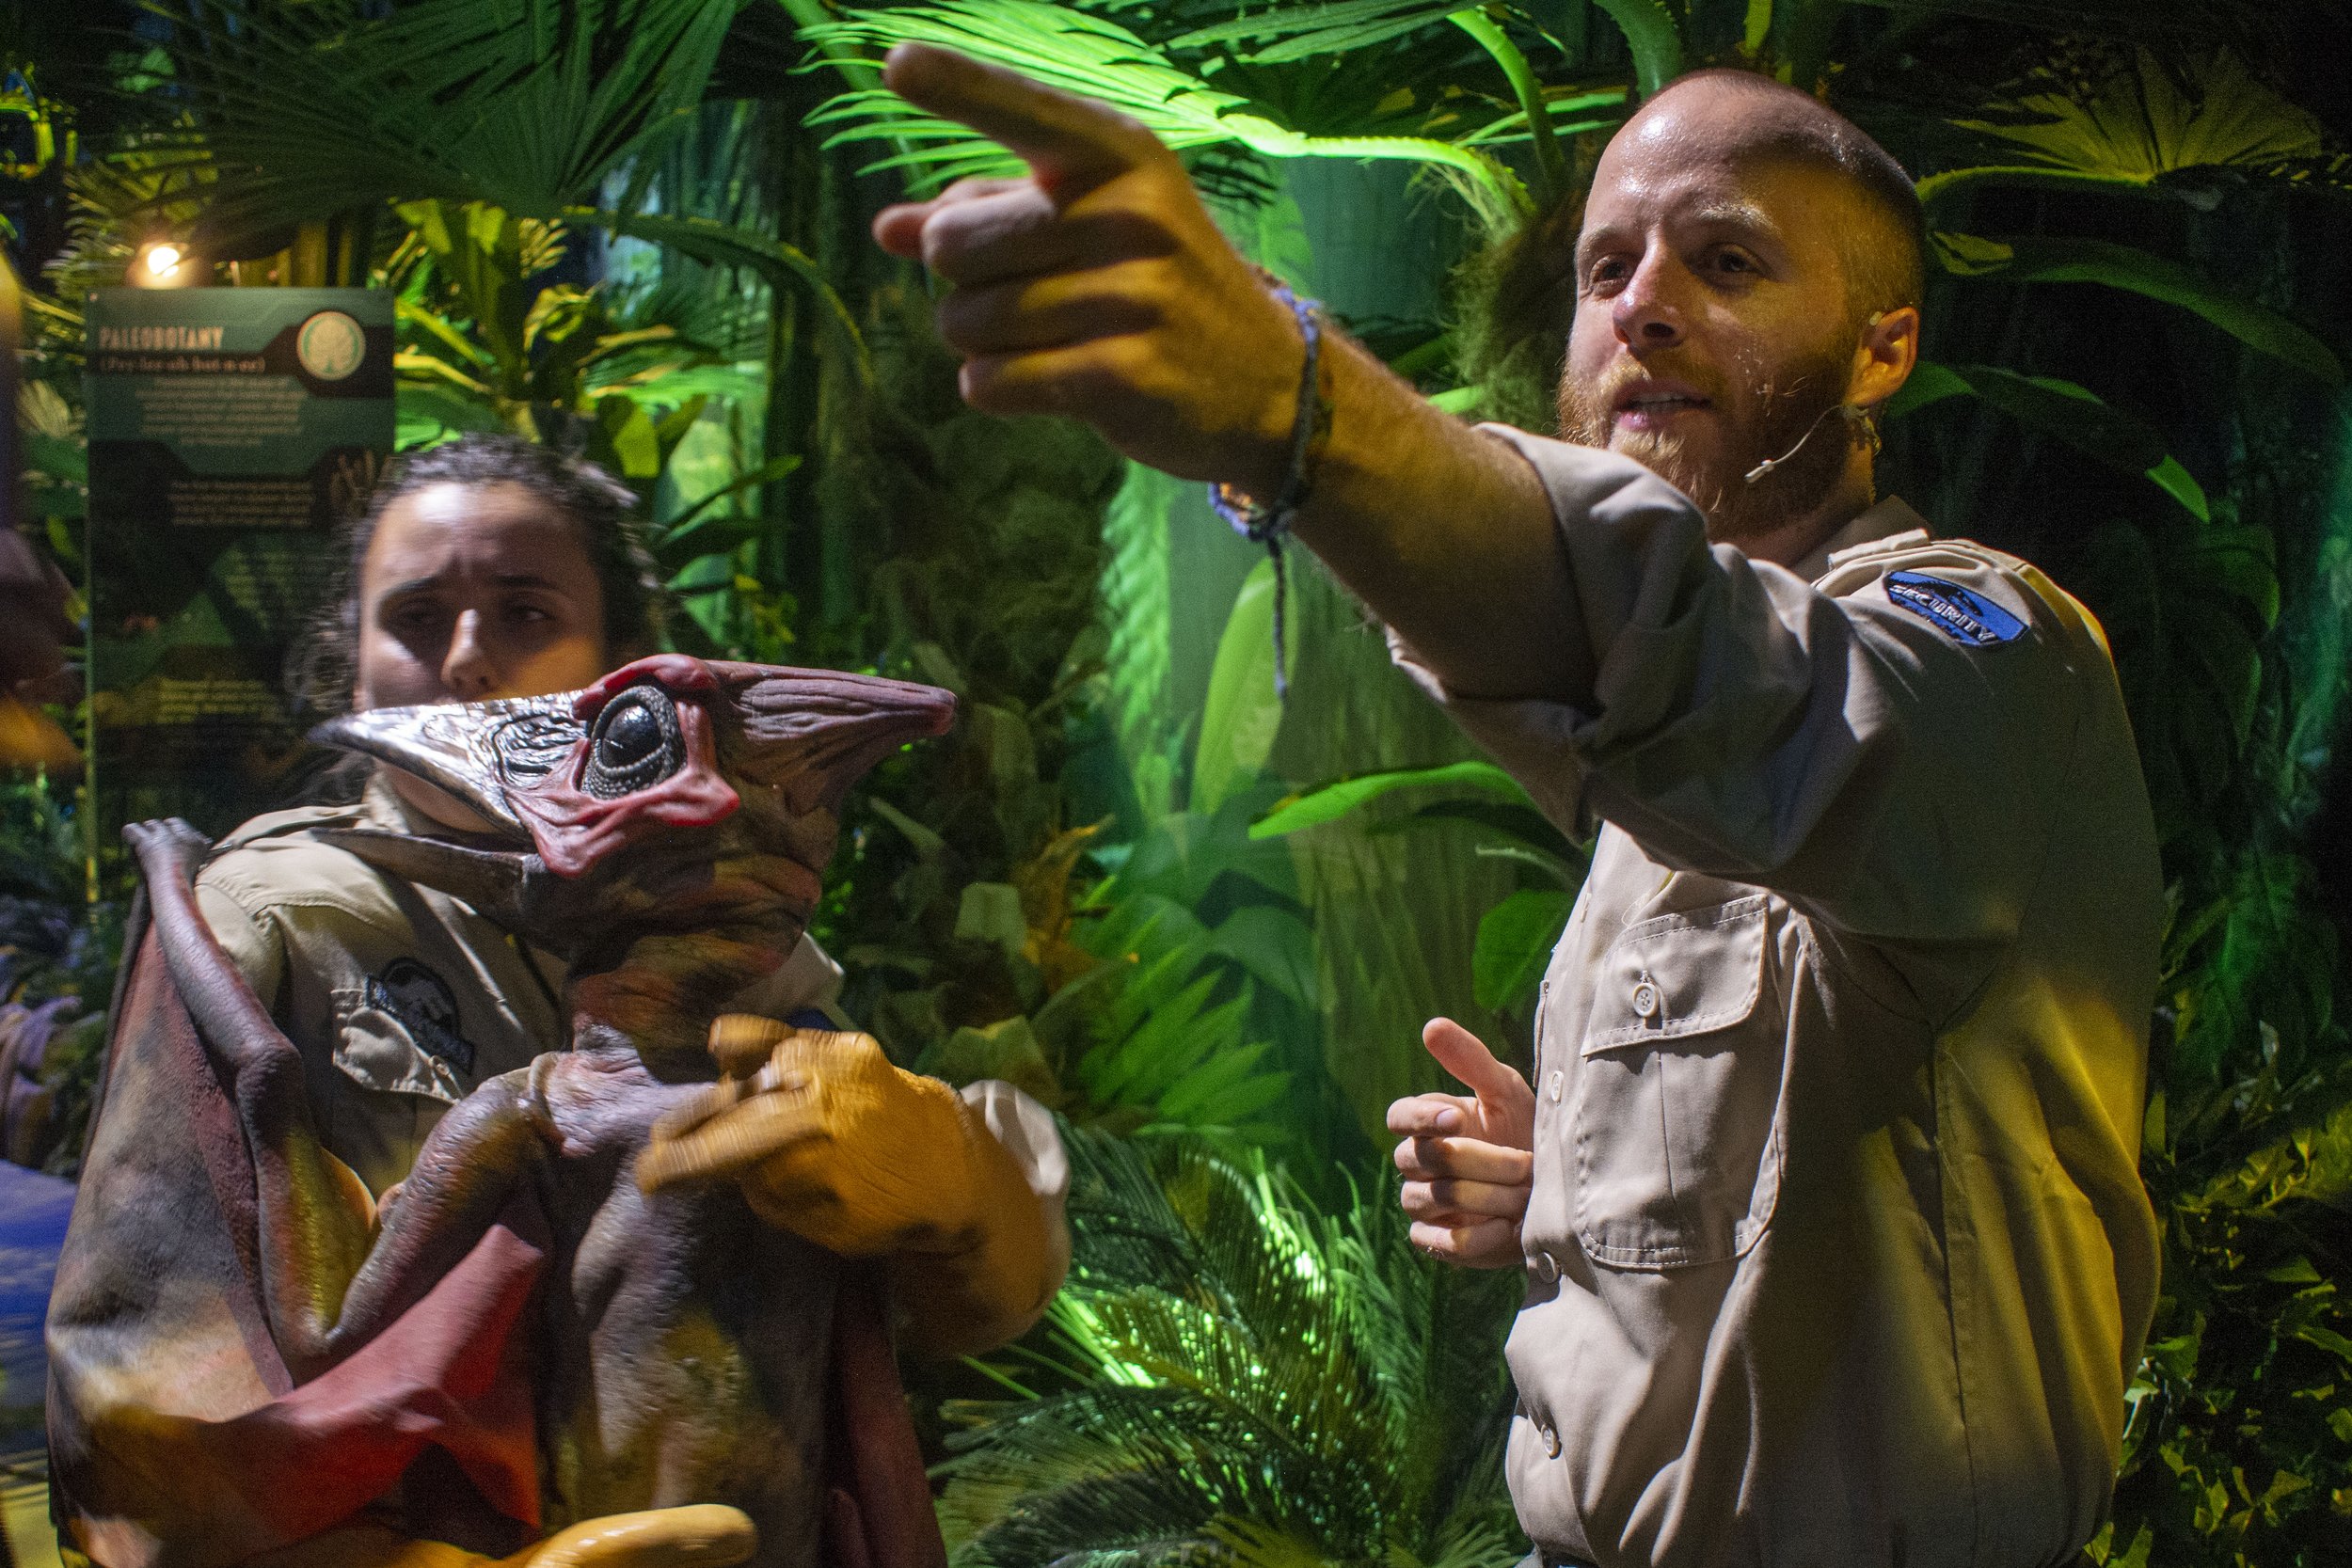 Jurassic World The Exhibition Stomps Into London With Roarsome Preview Night — The Jurassic Park 